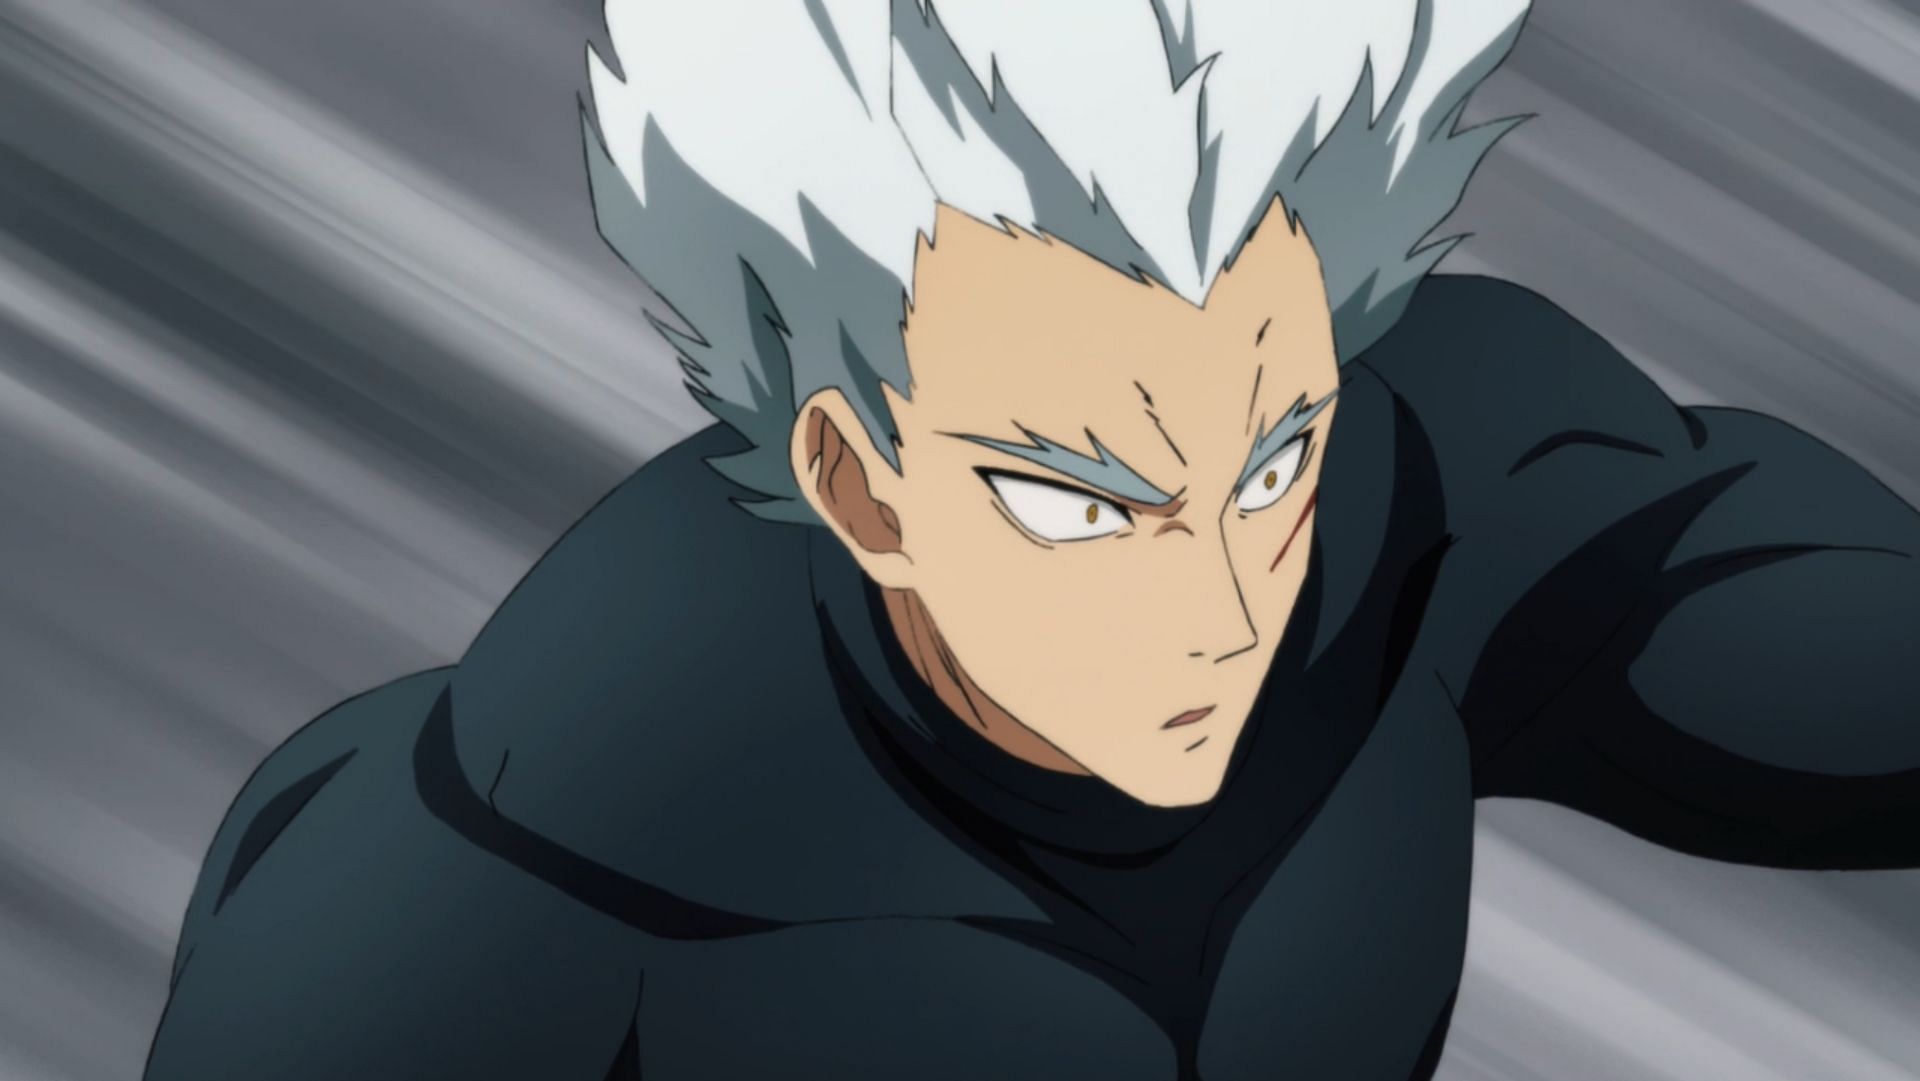 Garou, as seen in the anime One Punch Man (Image via Madhouse)